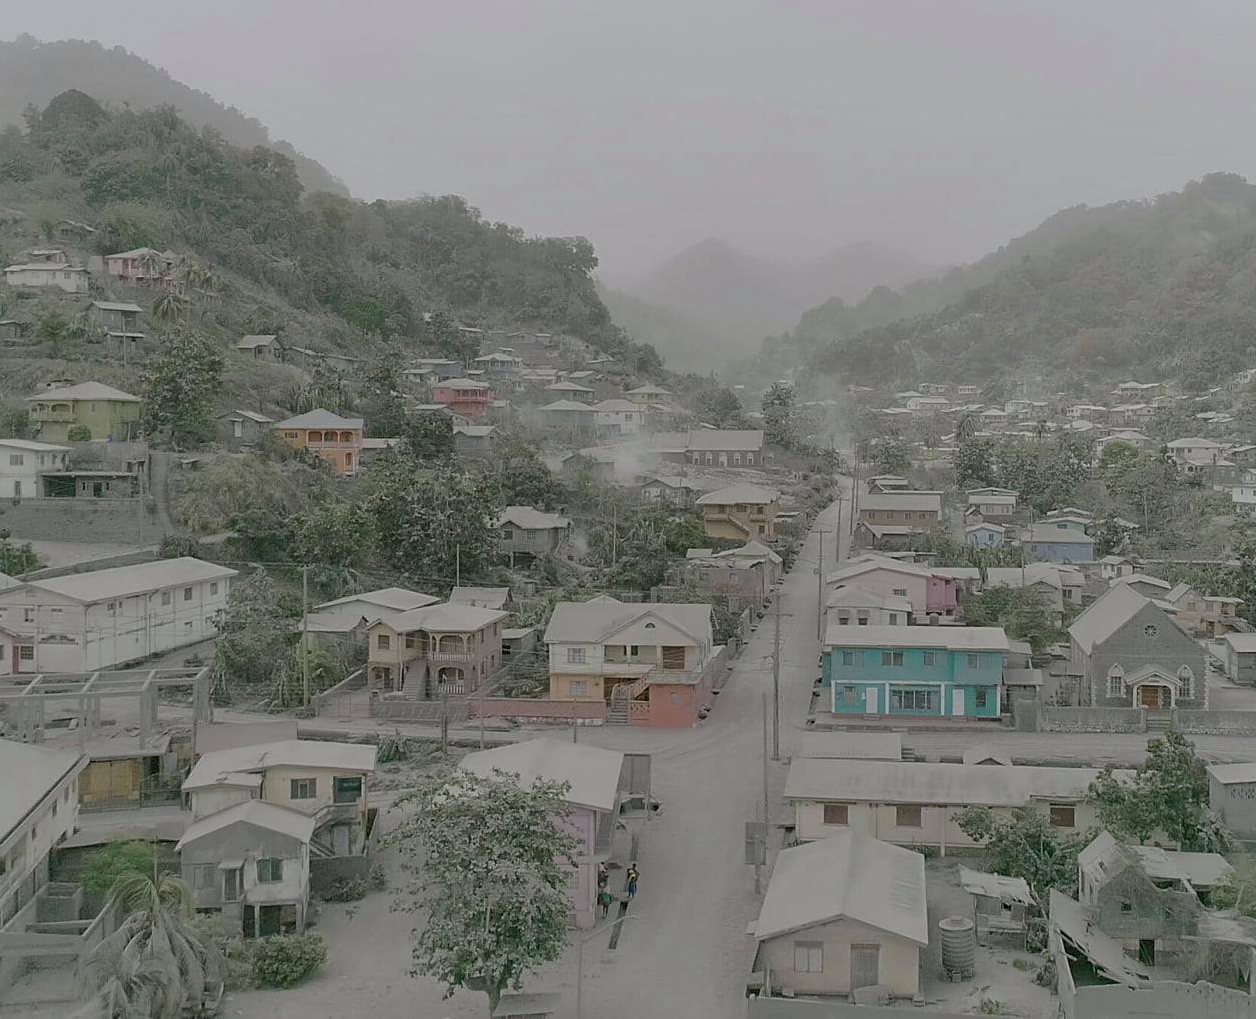 The landscape of St. Vincent and the Grenadines is shrouded in ash from the eruptions of the La Soufrière volcano in April 2021, which forced some 16,000 residents to evacuate their homes to cruise ships and safer parts of the island. © Stv Online